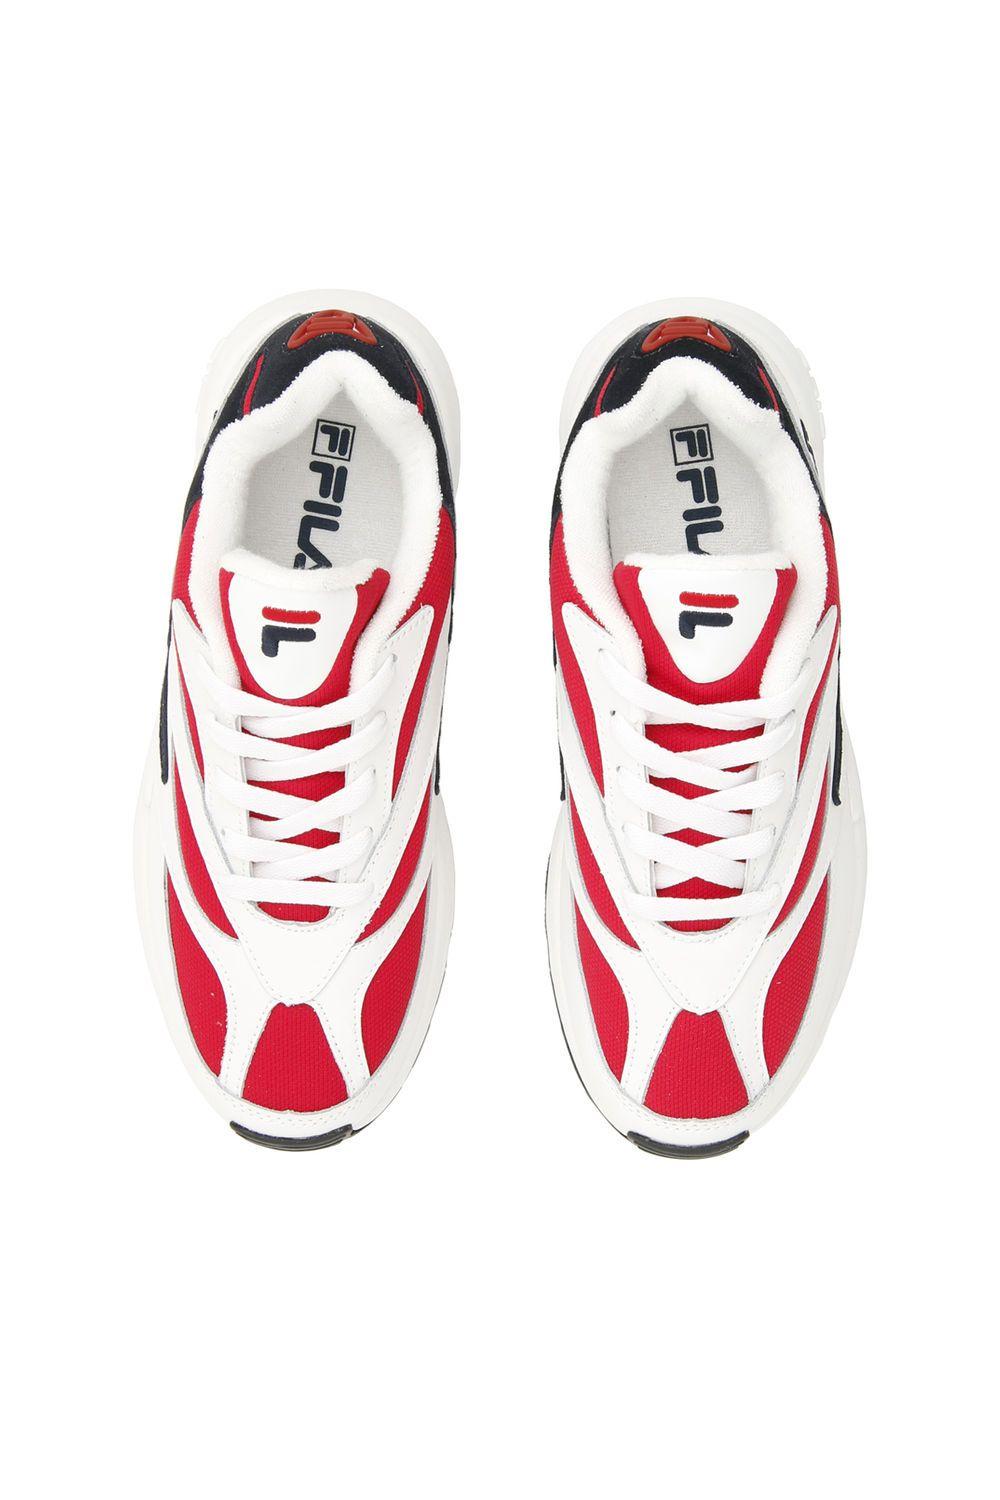 Fila Leather 94 Low Trainers in White,Red,Blue (Red) for Men - Lyst